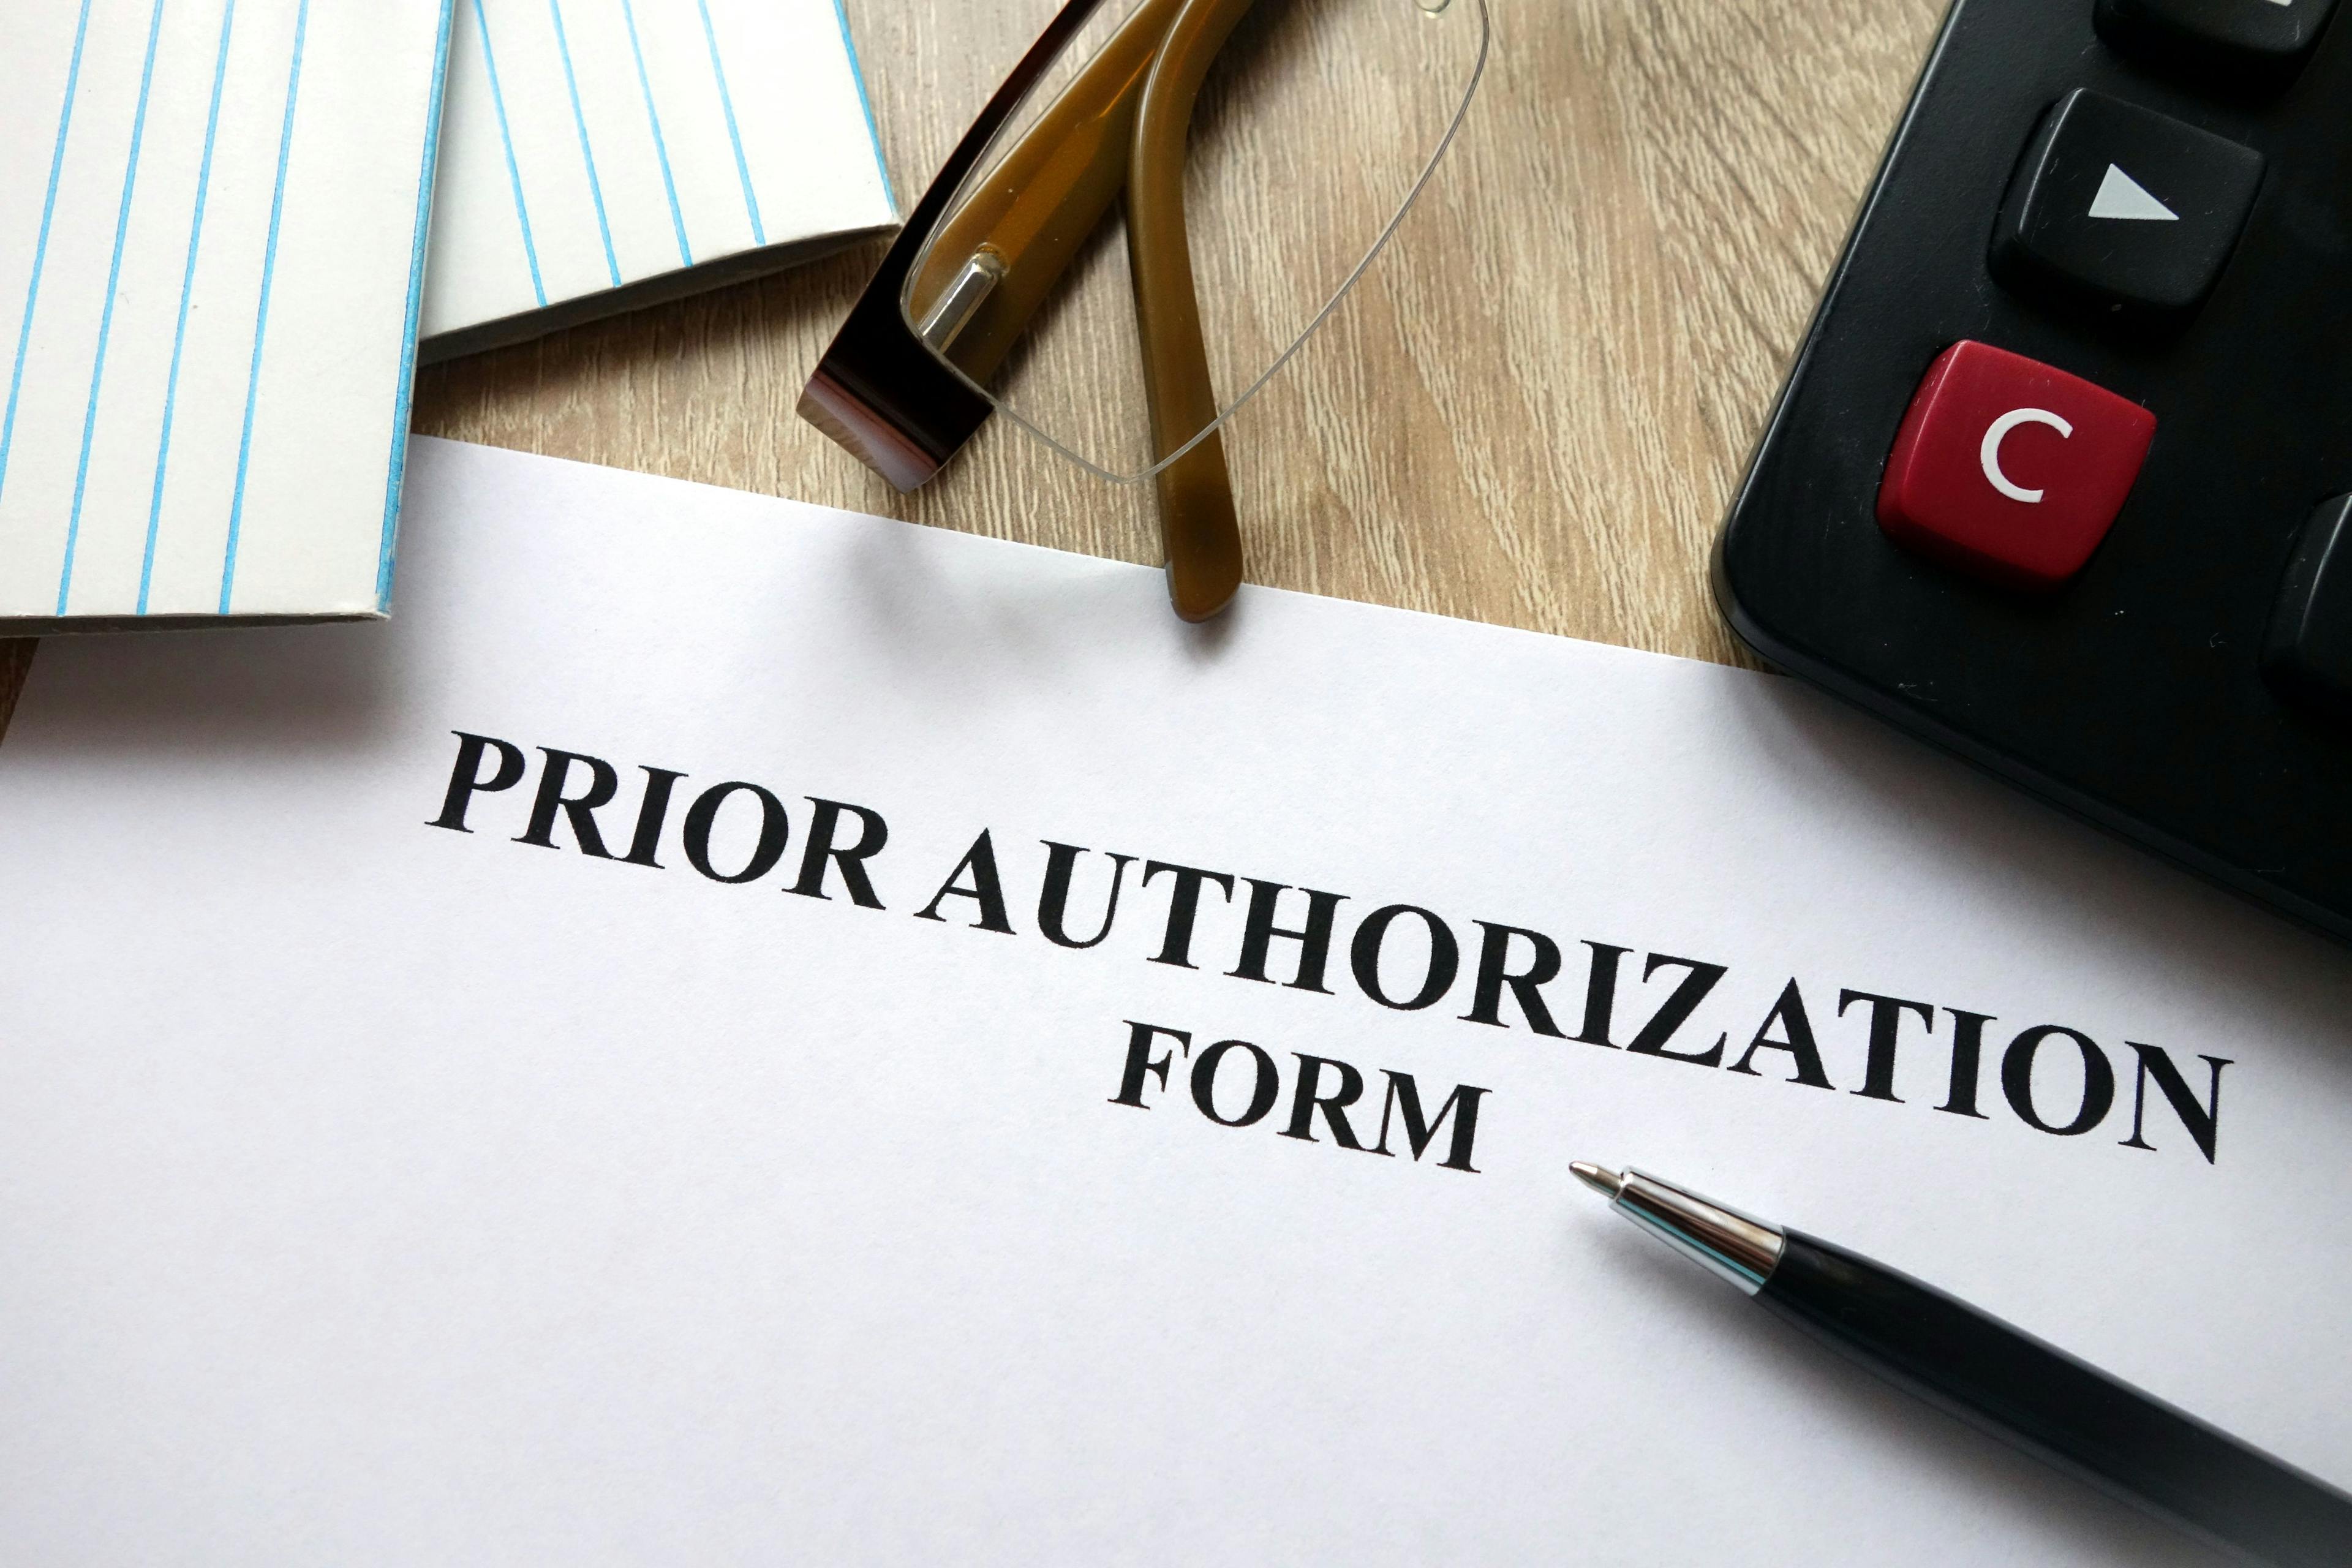 Possible expansion of prior authorization to Medicare Fee For Services draws objections from American Academy of Ophthalmology